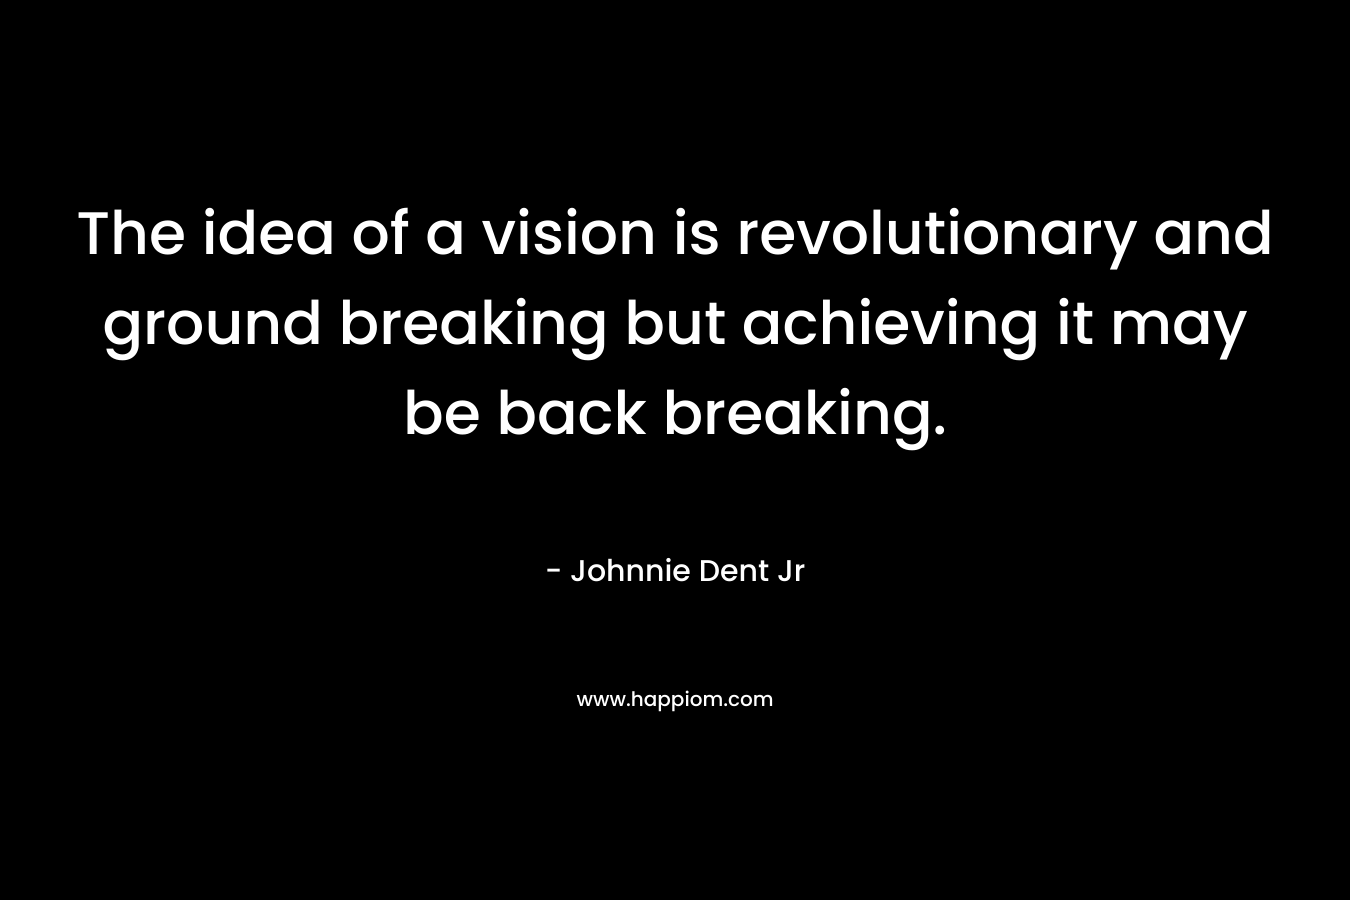 The idea of a vision is revolutionary and ground breaking but achieving it may be back breaking.